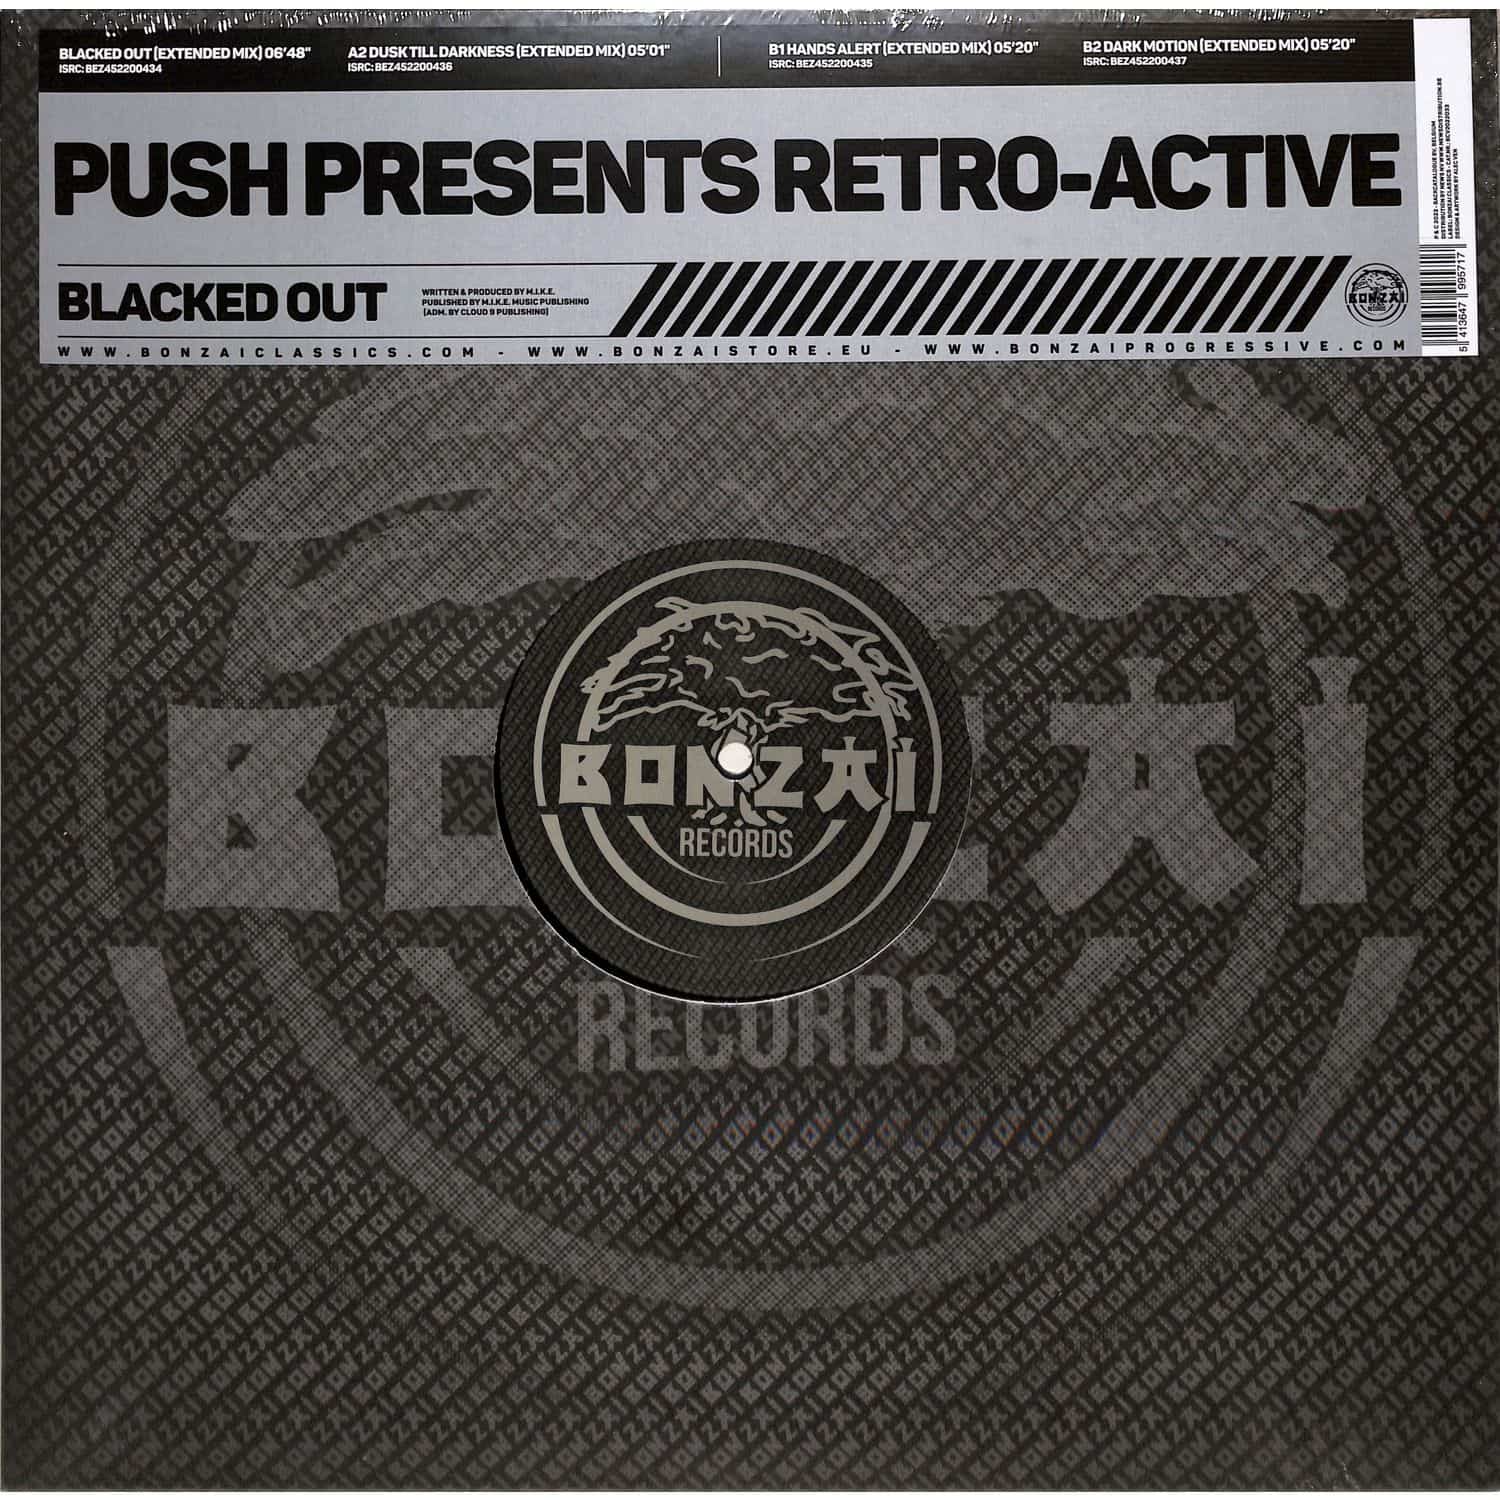 Push presents Retro-Active - BLACKED OUT